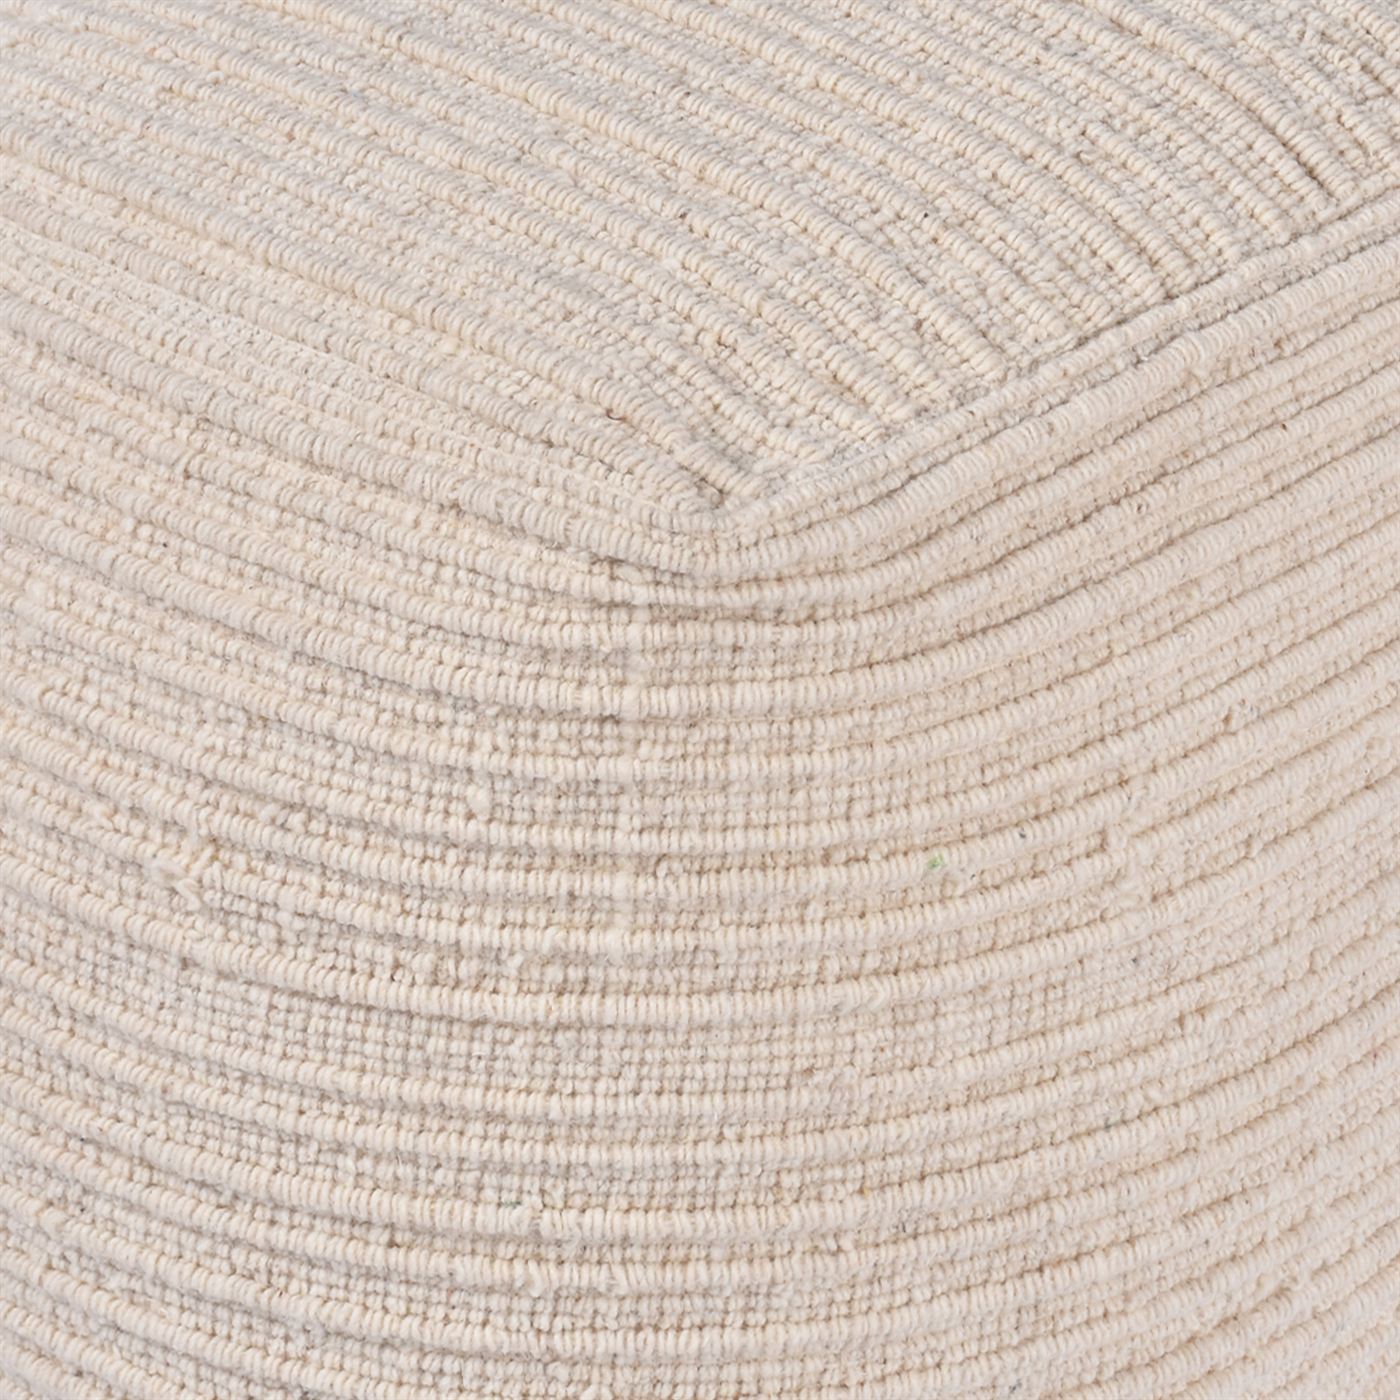 Wilcox-II Pouf, Wool, Natural White, Hand woven, Flat Weave 